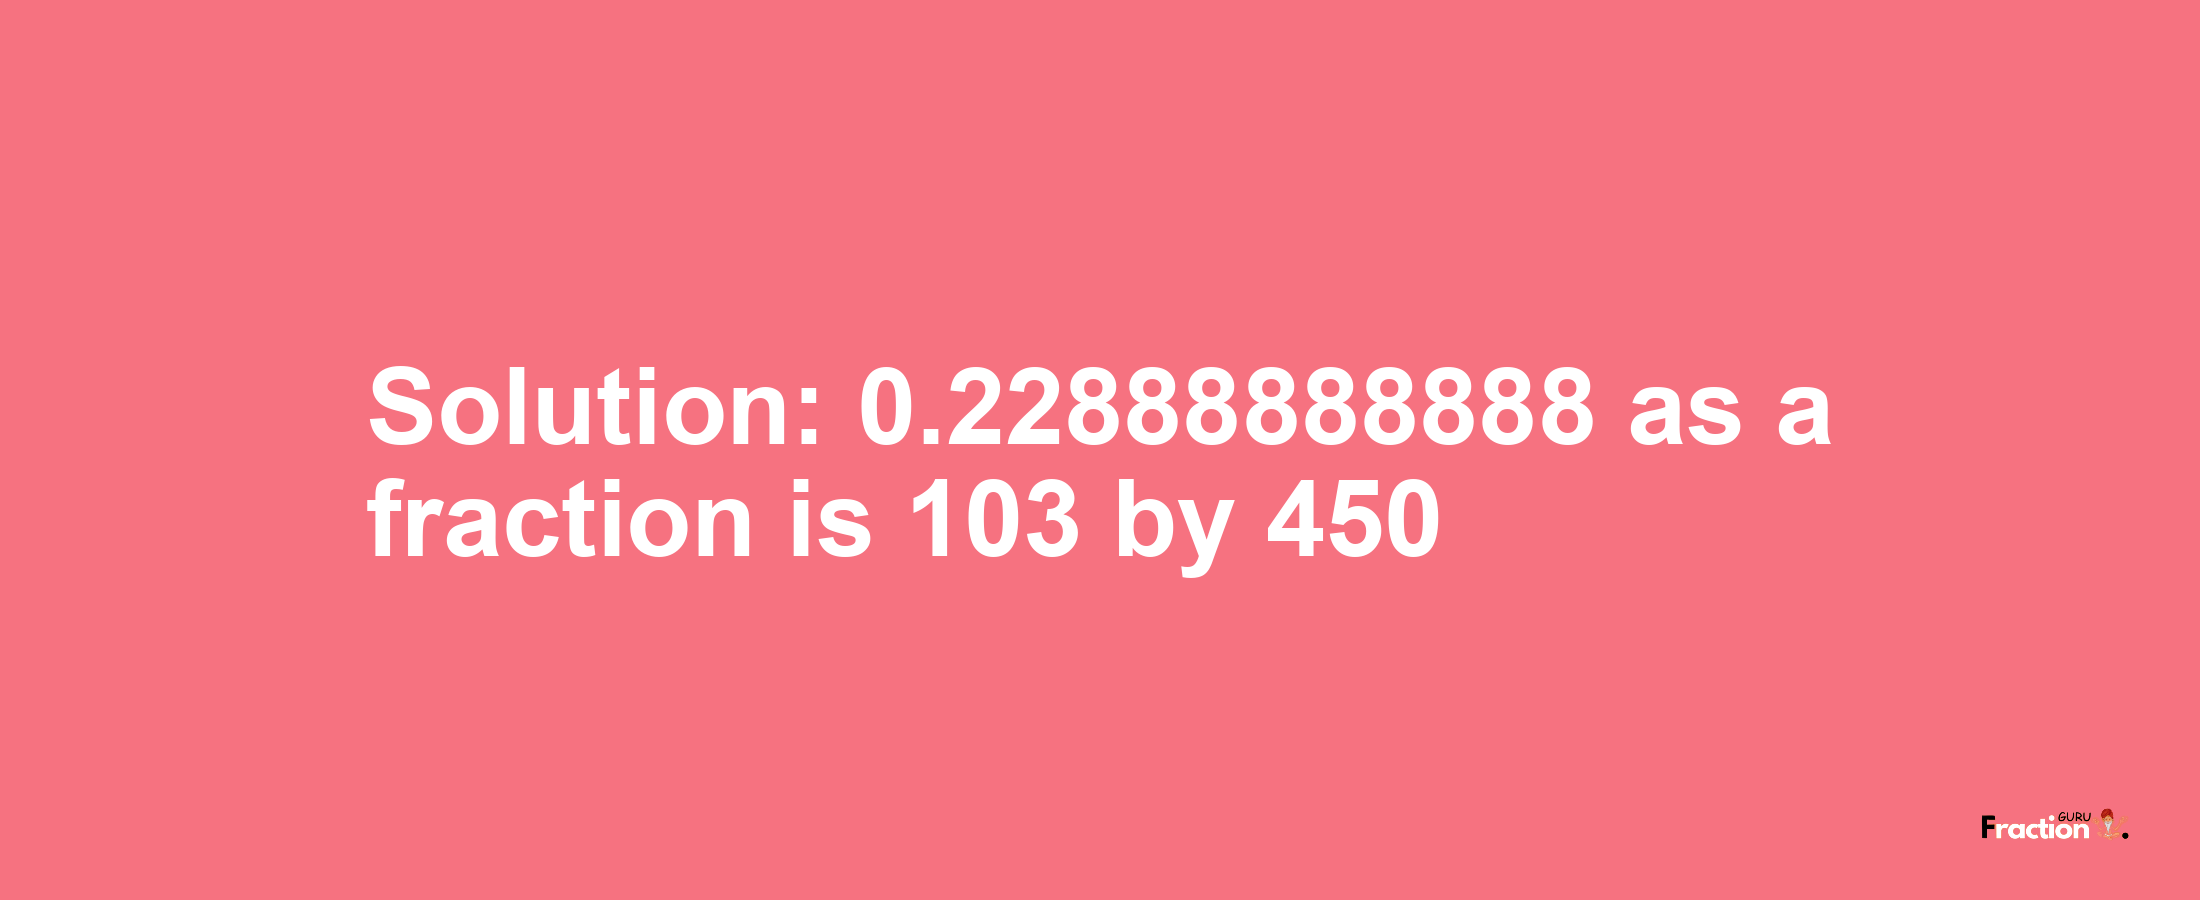 Solution:0.22888888888 as a fraction is 103/450